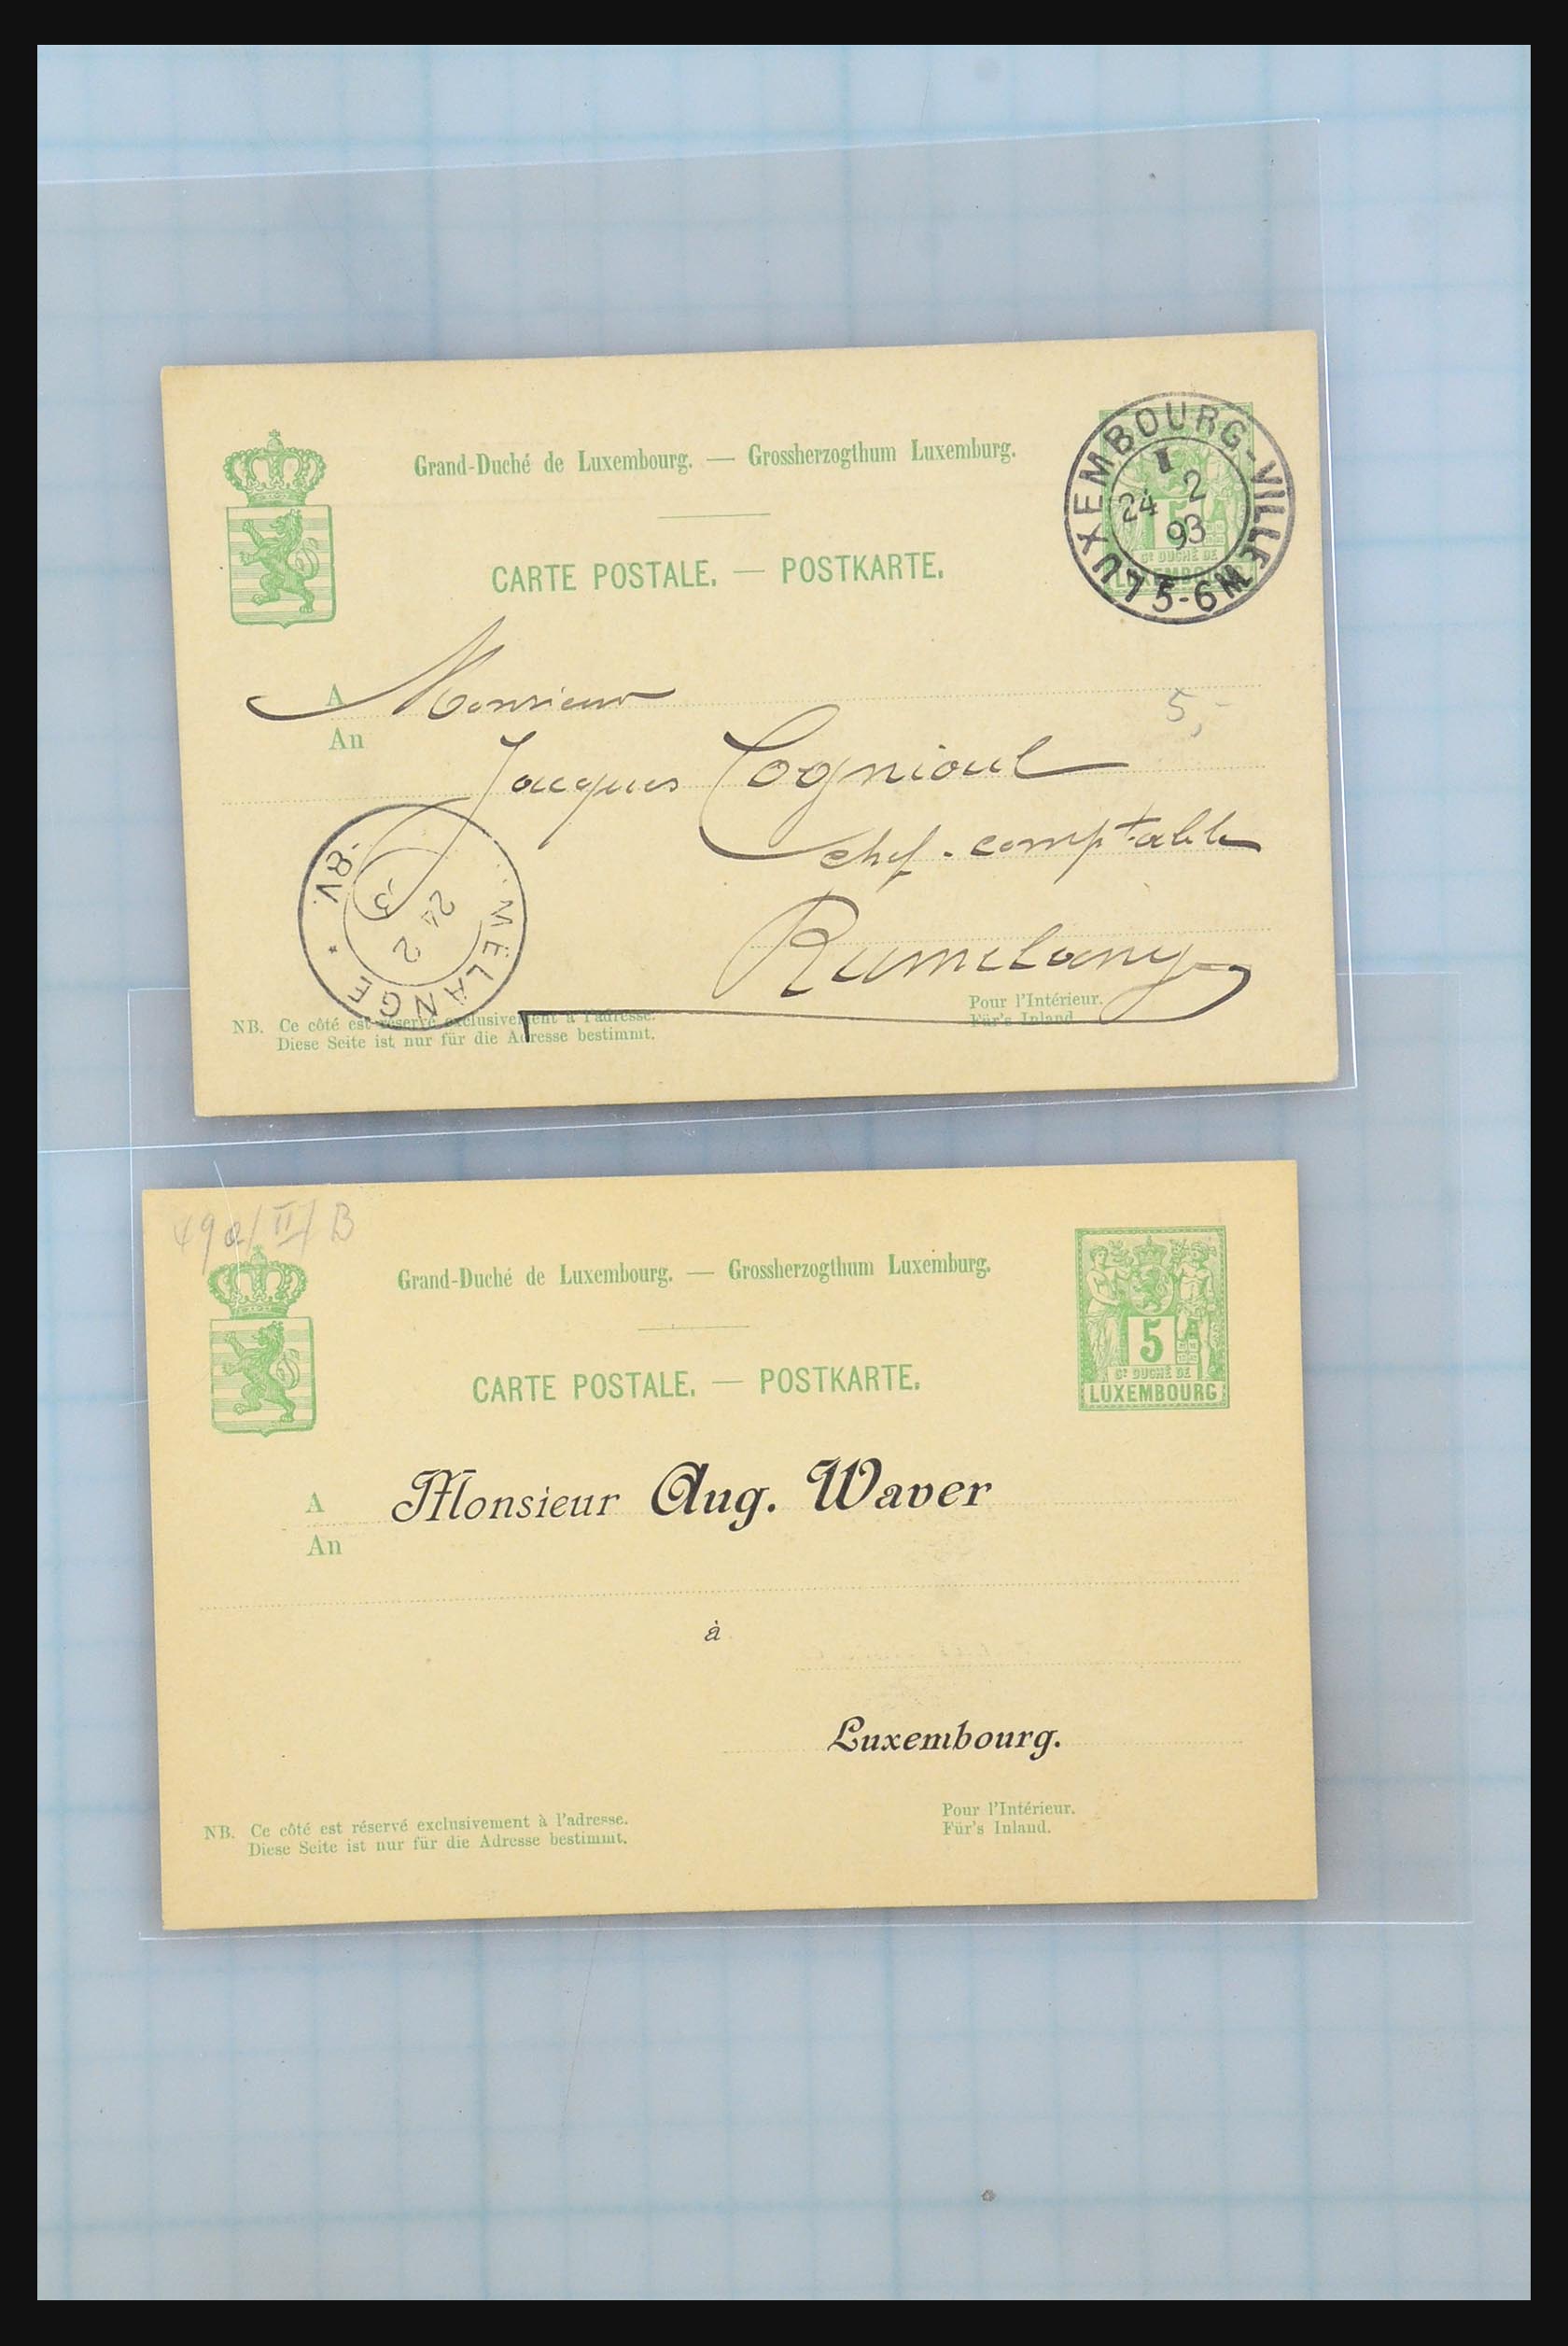 31358 063 - 31358 Portugal/Luxemburg/Greece covers 1880-1960.